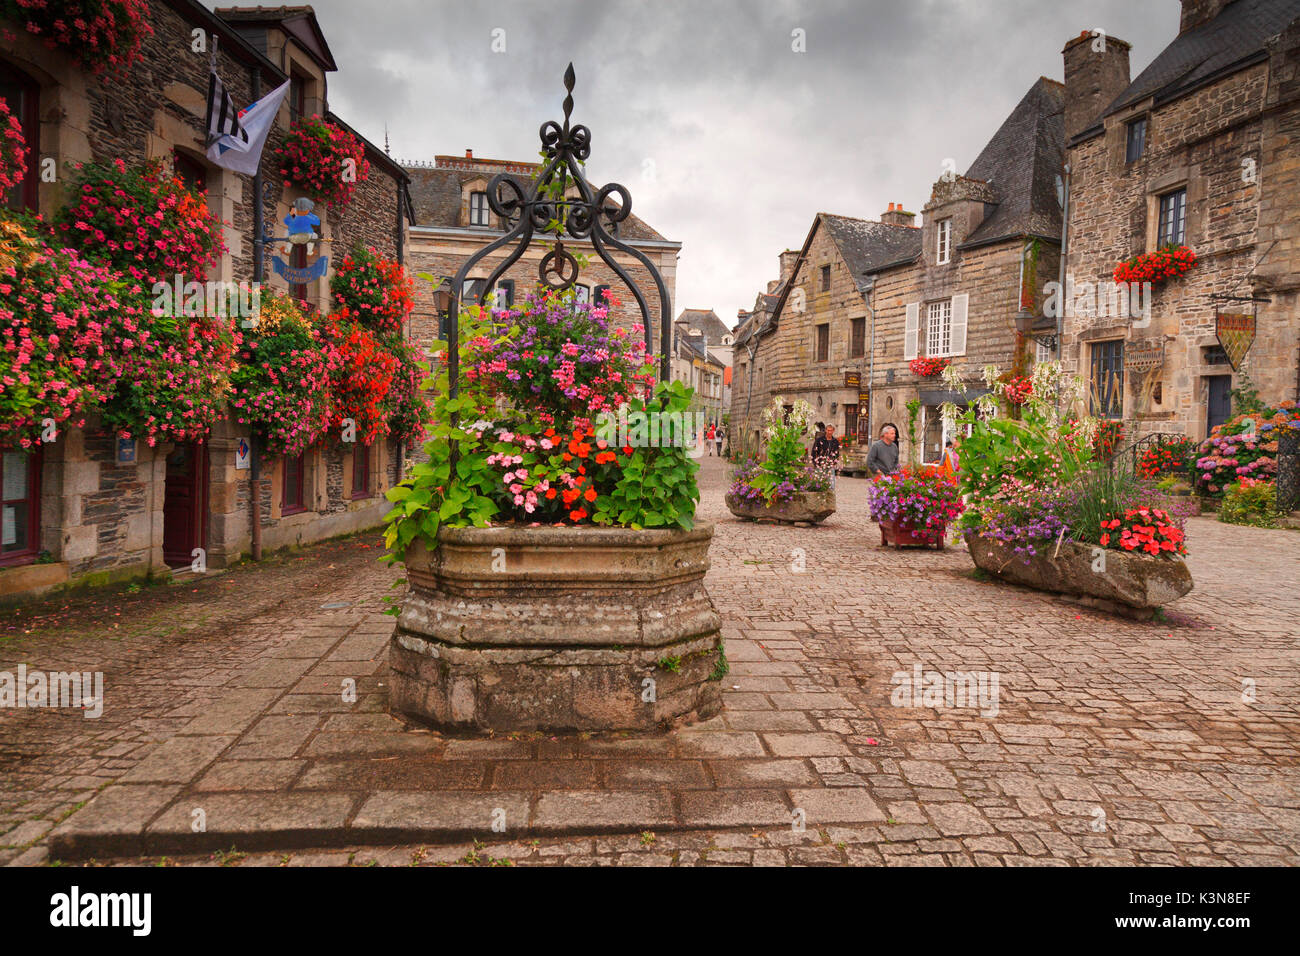 Rochefort-en-terre, Brittany, Morbihan department, France. It is one of the villages included in the list of 'Villes et villages fleuris.'  A visit during the summer season you can enjoy the beautiful blooms of geraniums that adorn this quiet medieval village. Stock Photo